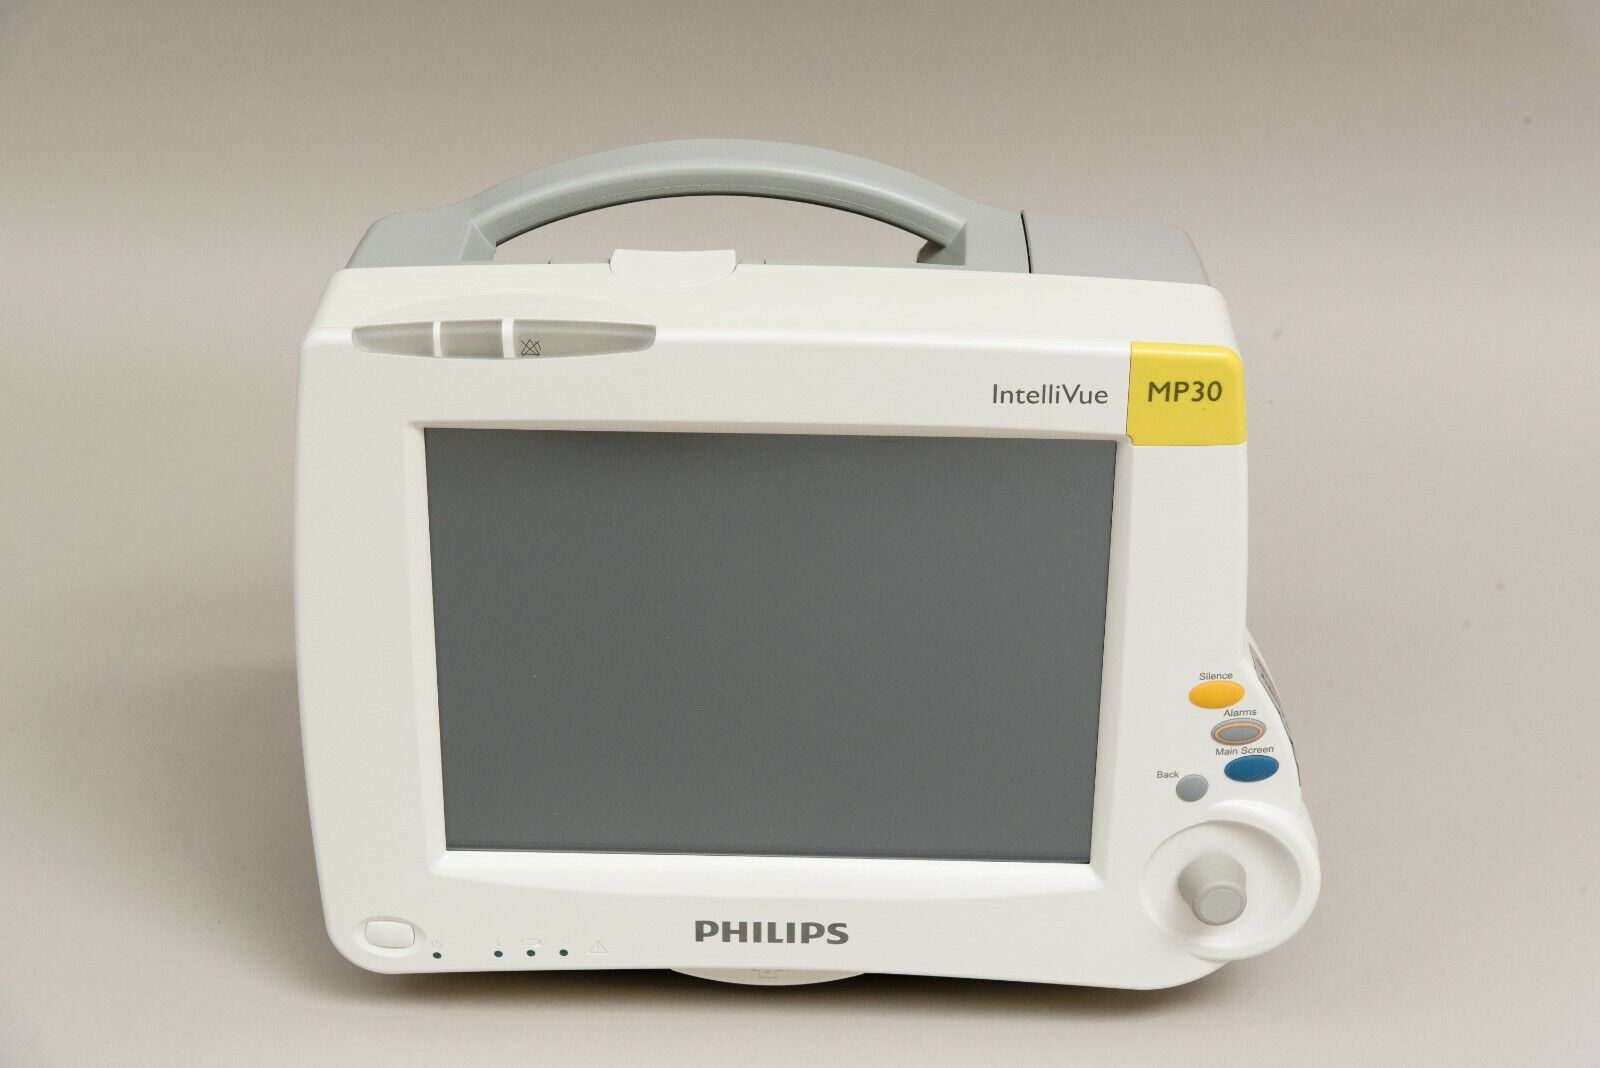 Lot of 5 Refurbished Philips IntelliVue MP30 Monitor  Available at Simon Medical Philips MP30 - фотография #3